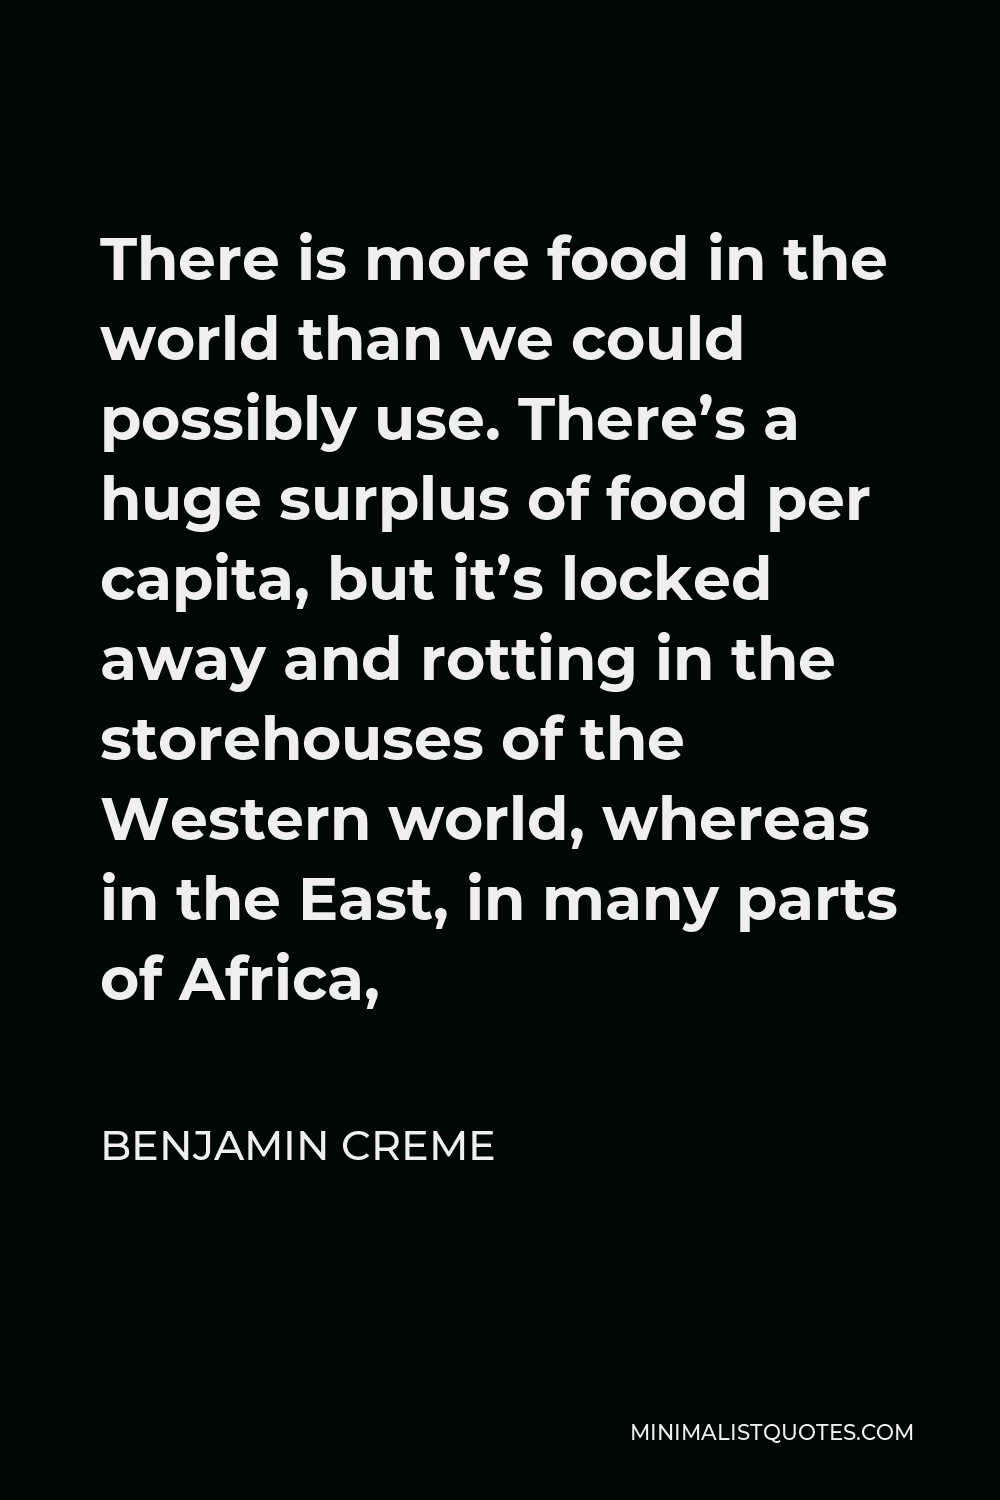 Benjamin Creme Quote - There is more food in the world than we could possibly use. There’s a huge surplus of food per capita, but it’s locked away and rotting in the storehouses of the Western world, whereas in the East, in many parts of Africa,